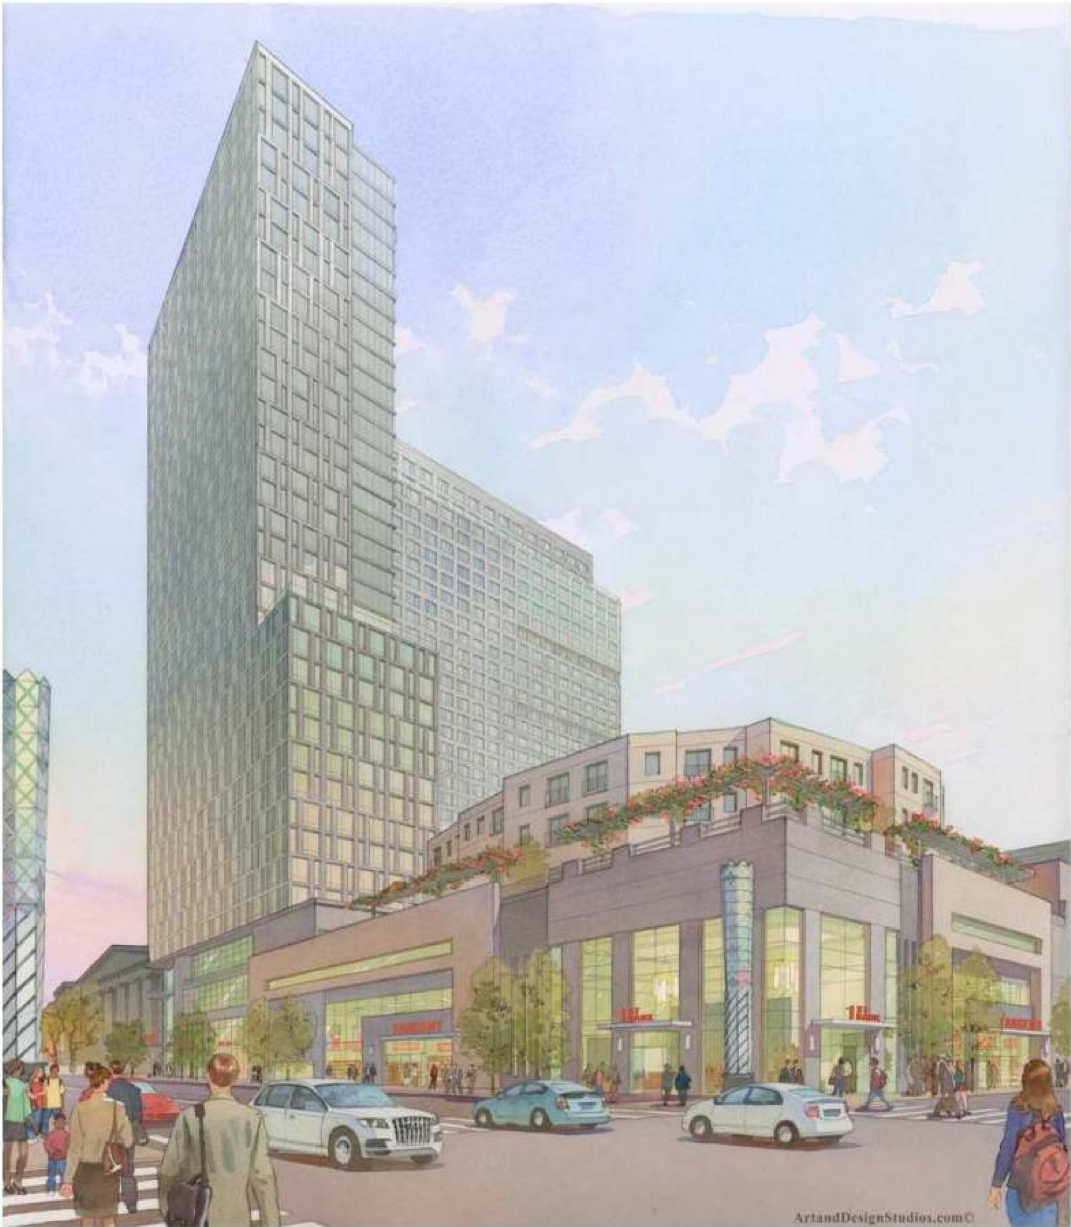 Rendering of Tower Investments development at Broad and Washington, looking northeast | Cope Linder Architects, Feb. 2016